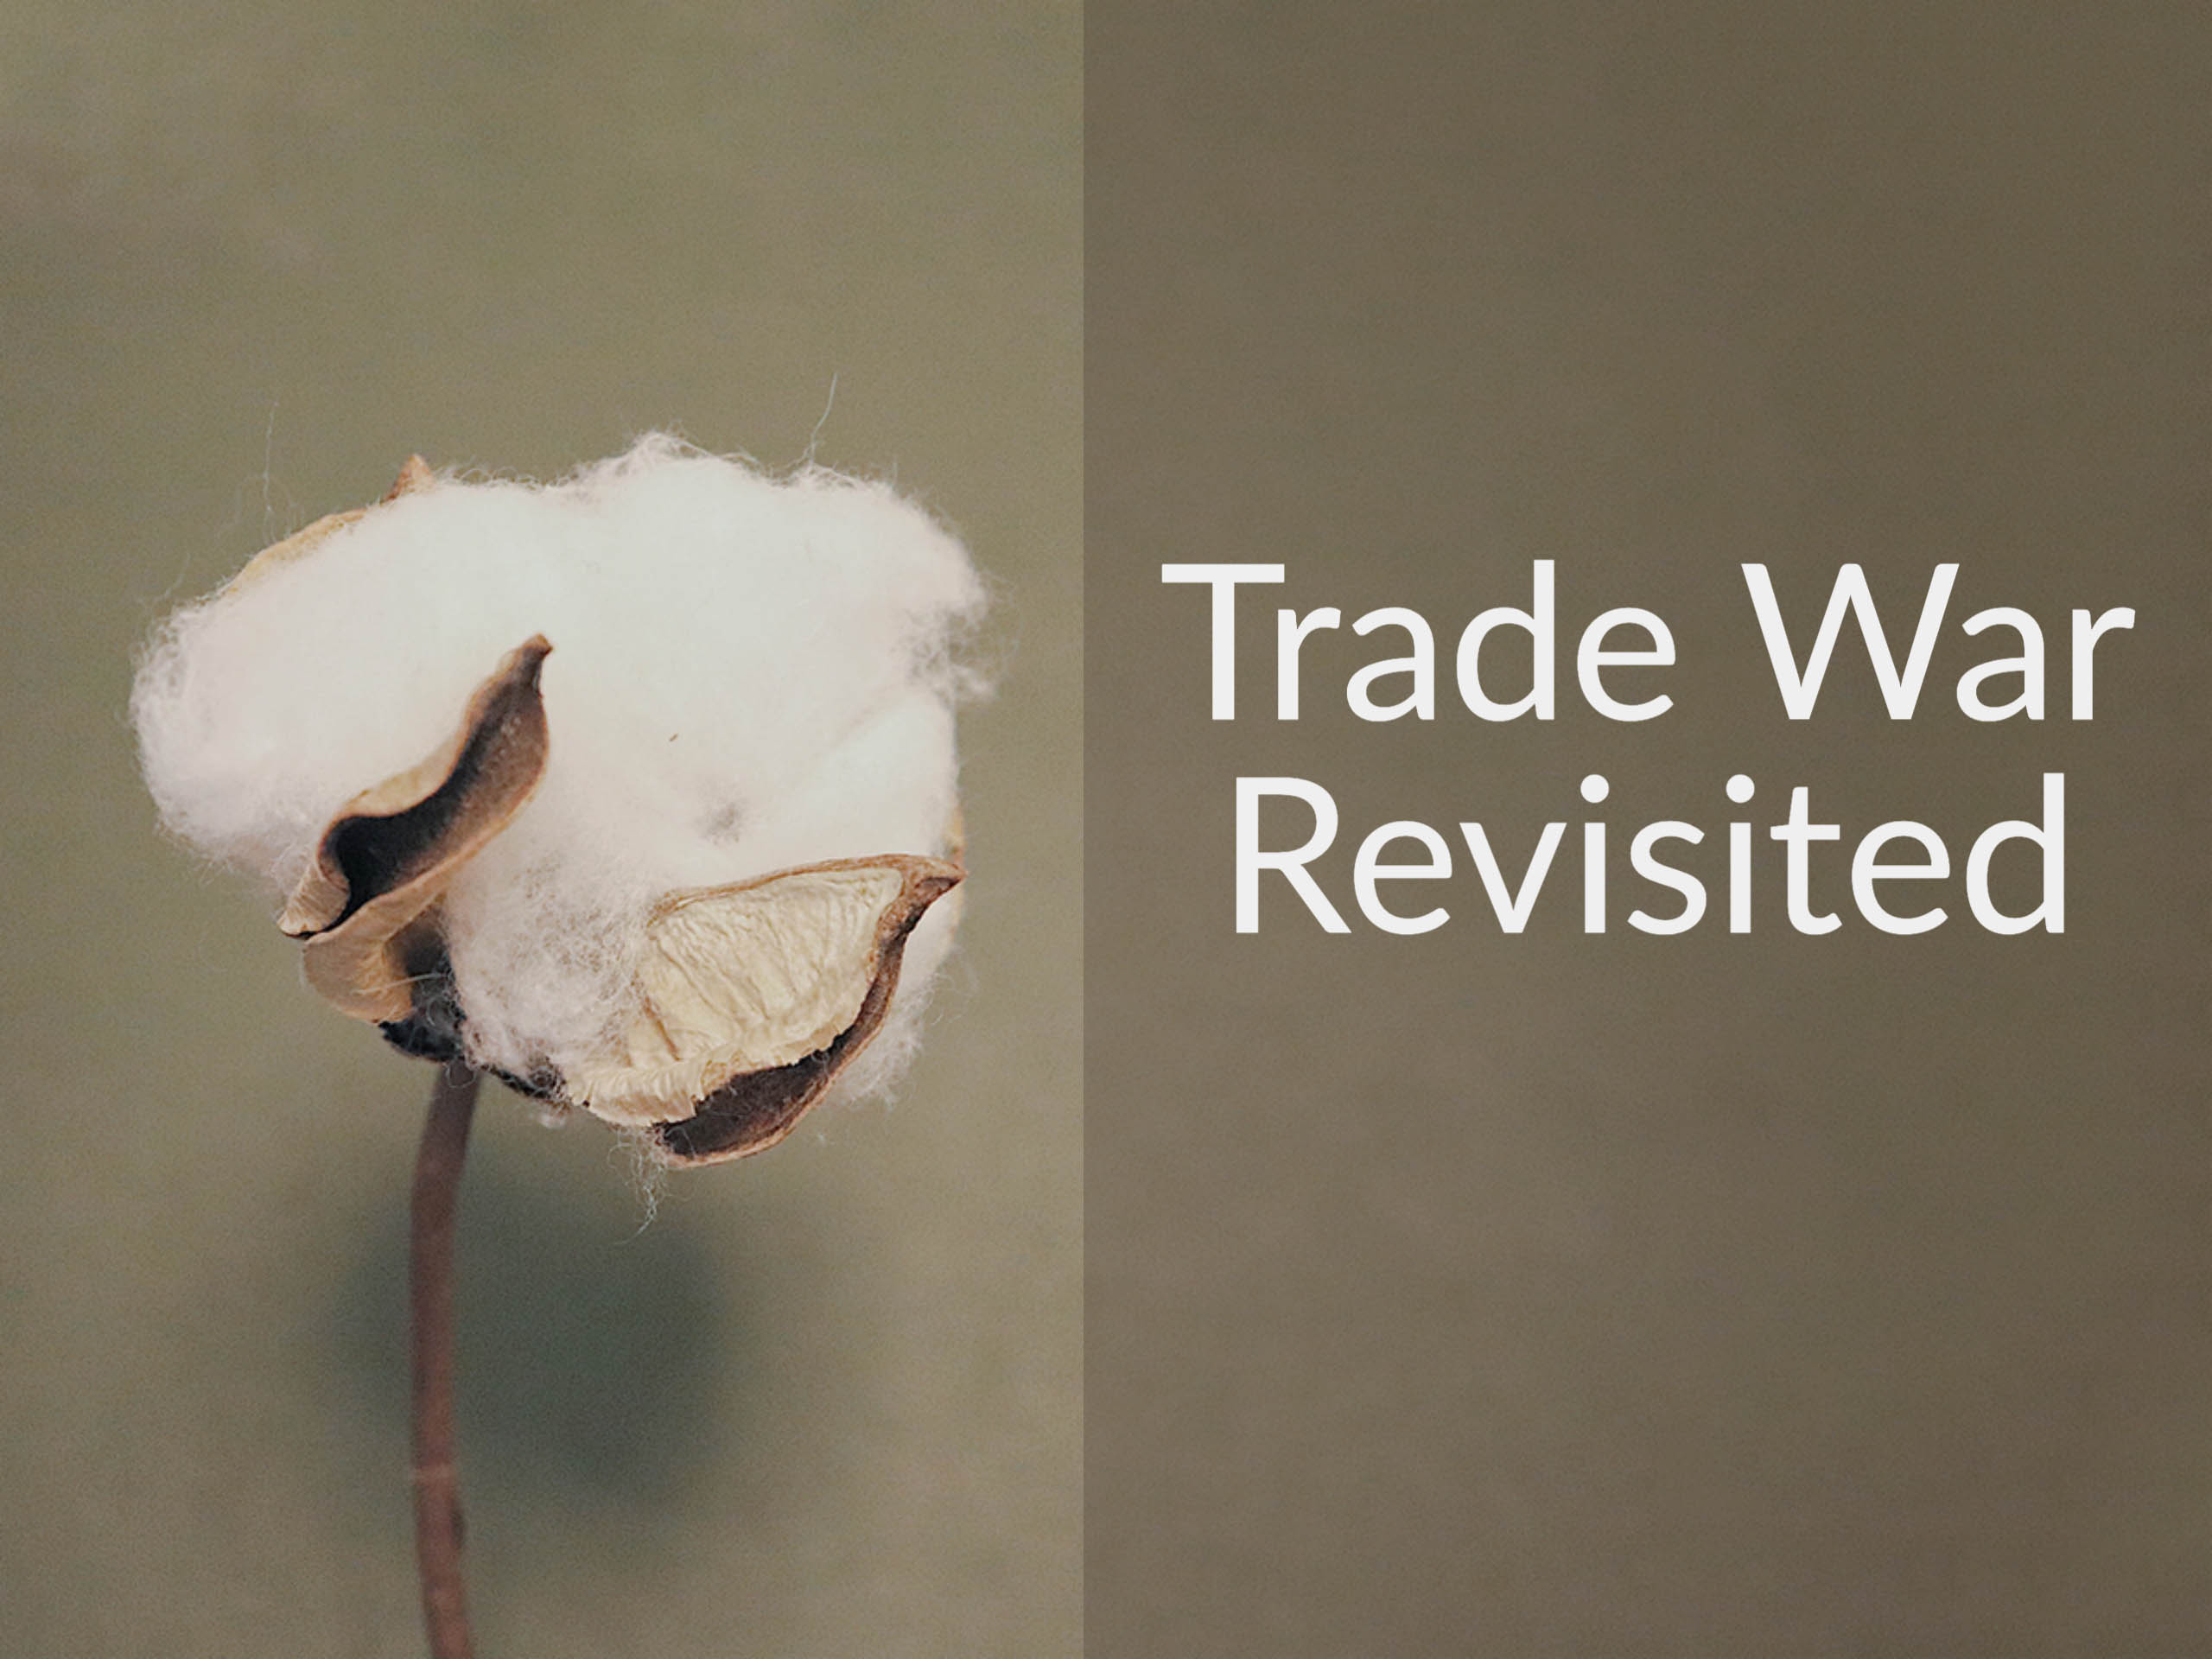 Cotton plant with the caption "Trade War Revisited"